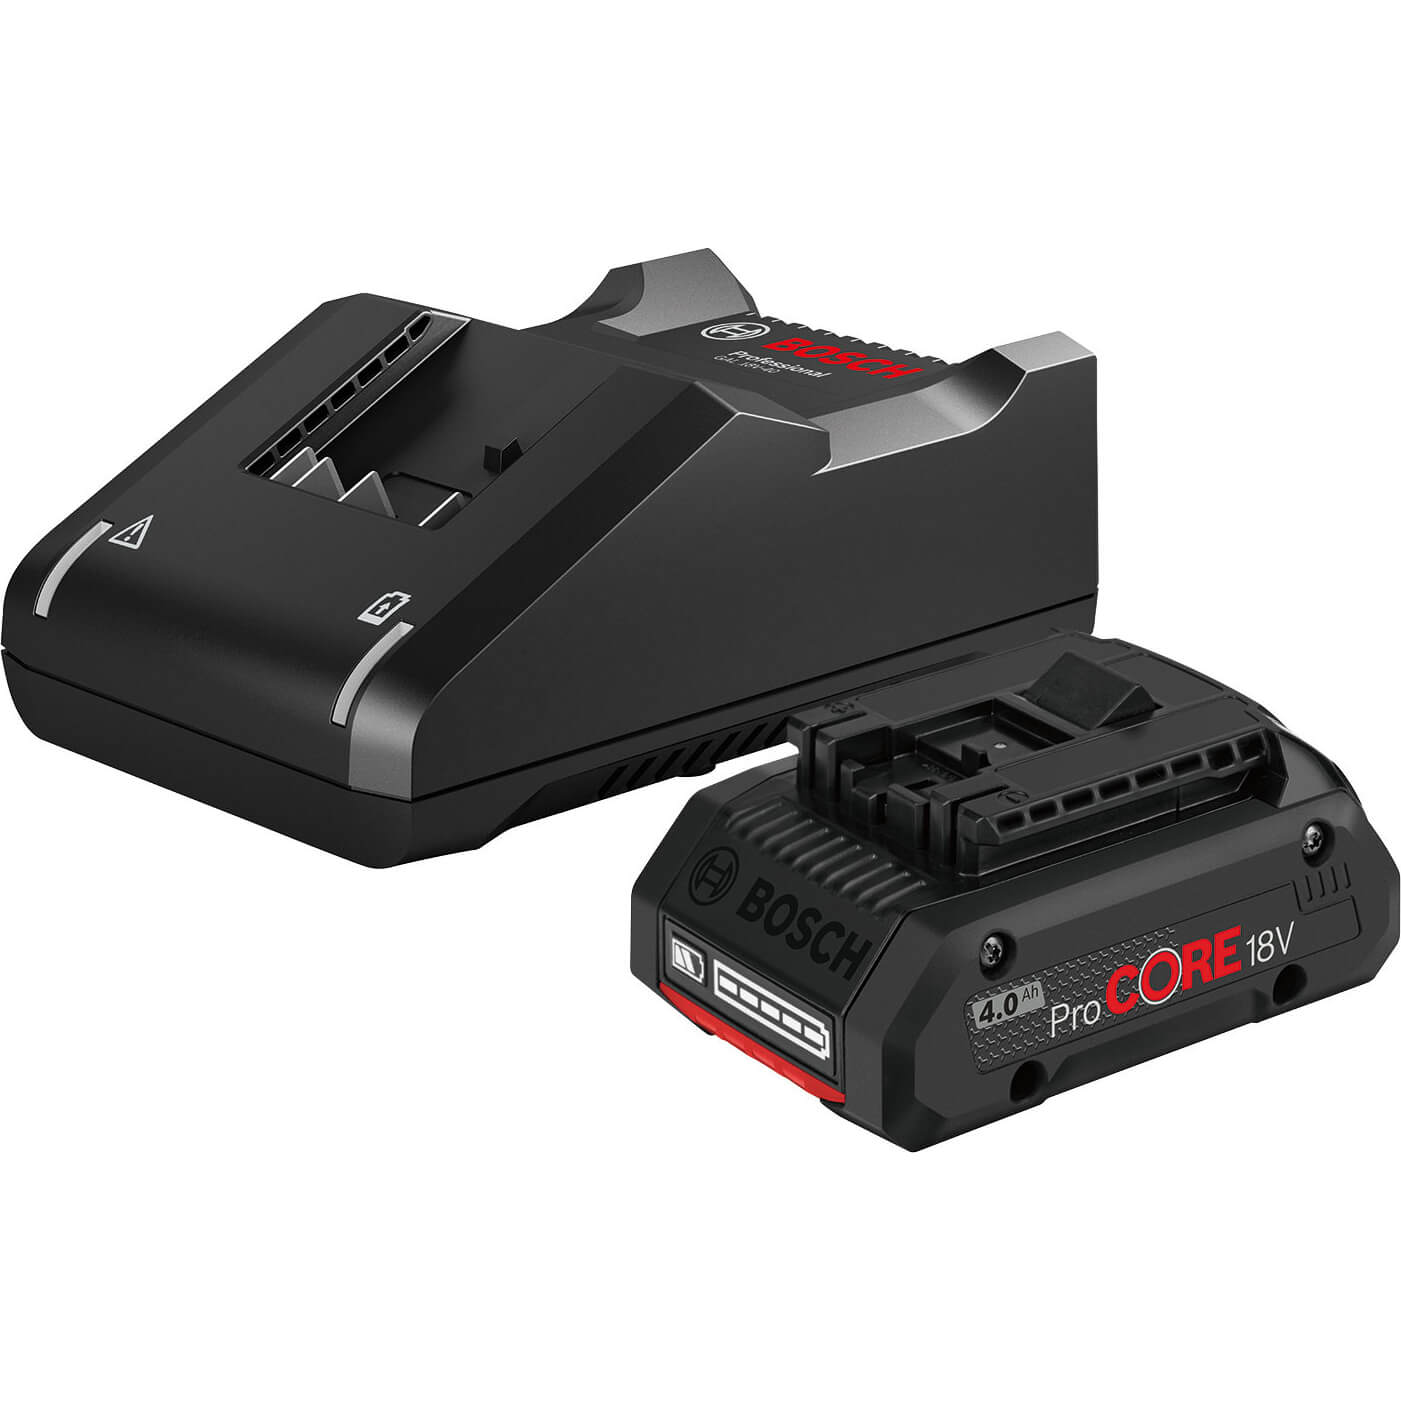 Image of Bosch Genuine BLUE 18v Cordless ProCORE Li-ion Battery 4ah and Charger 4ah